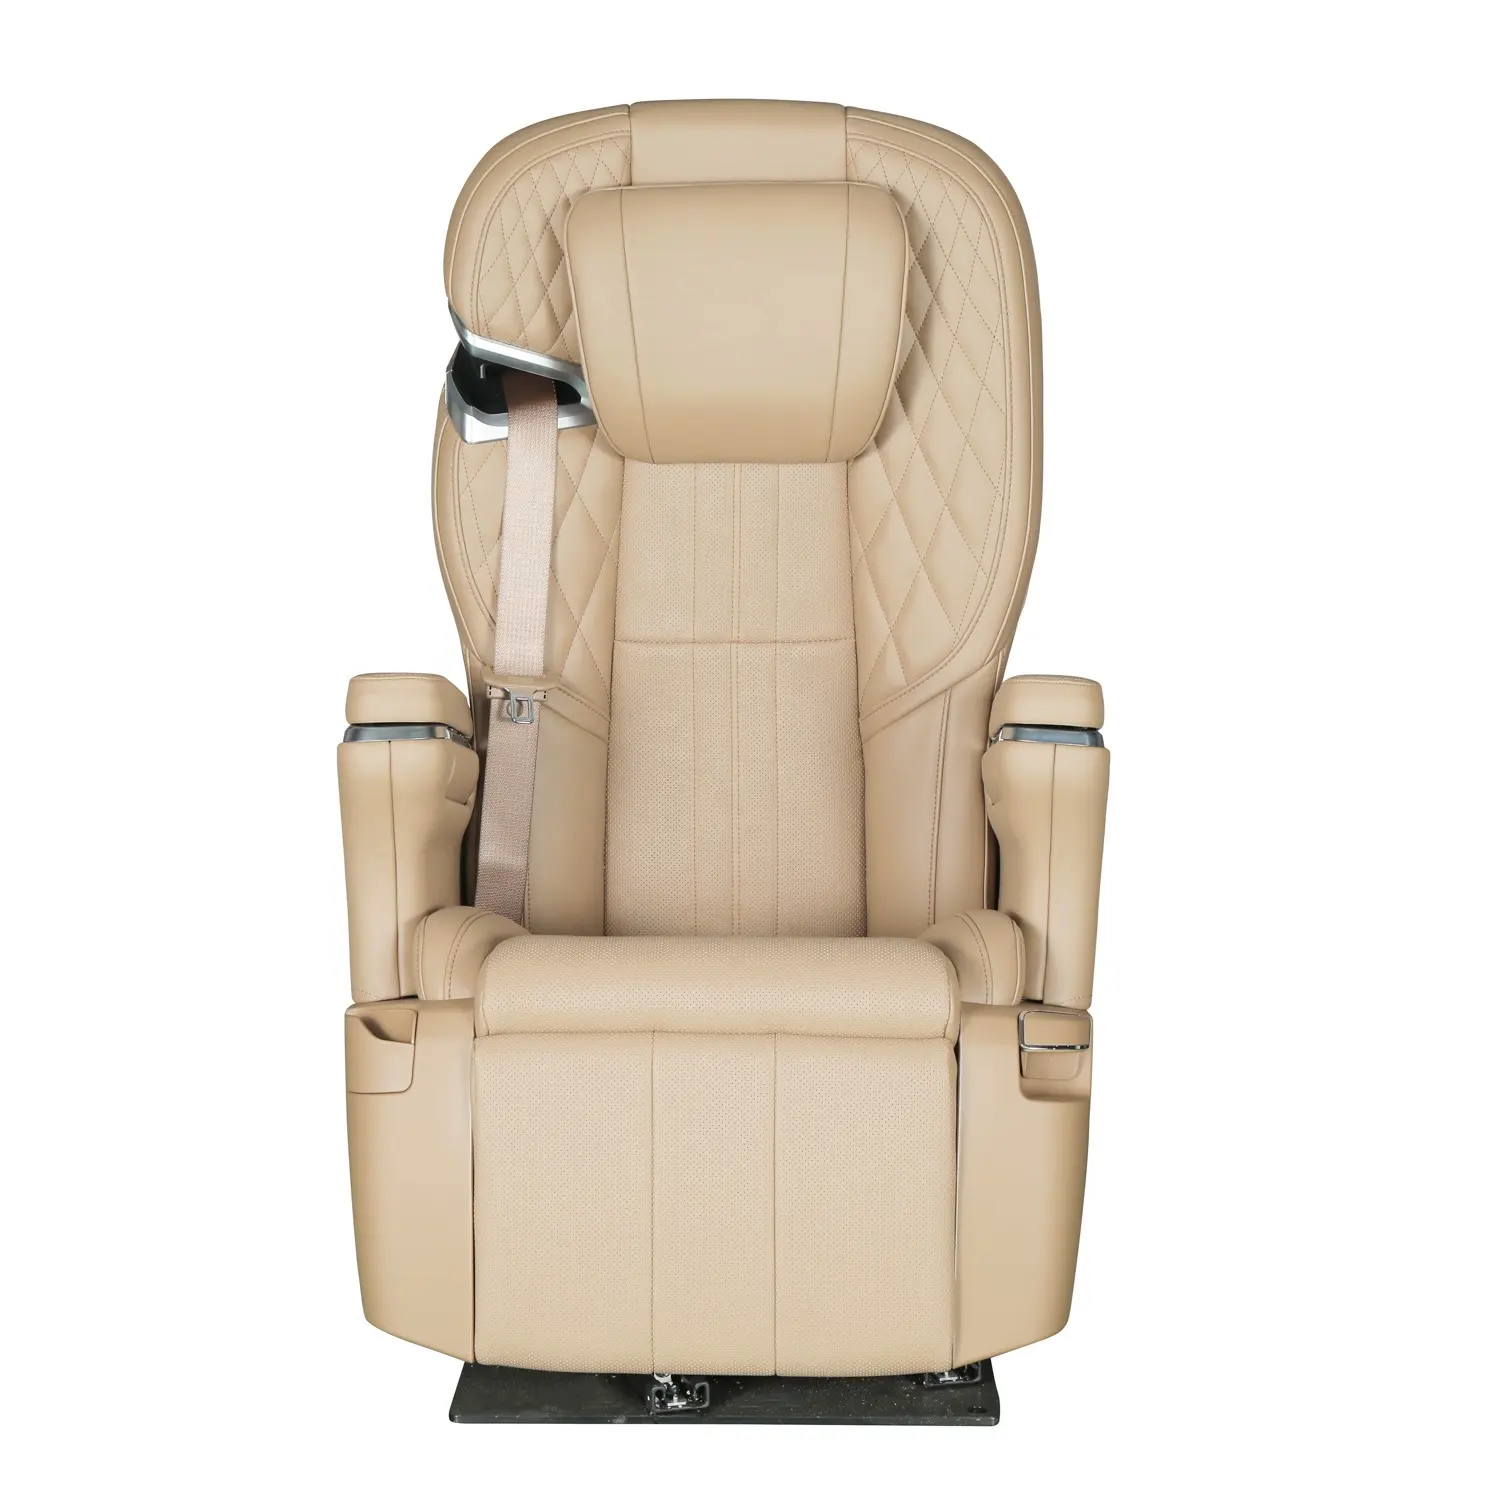 Van interior seat suitable for conversion of MPV and cars like Vito, Coaster, Viano and so on